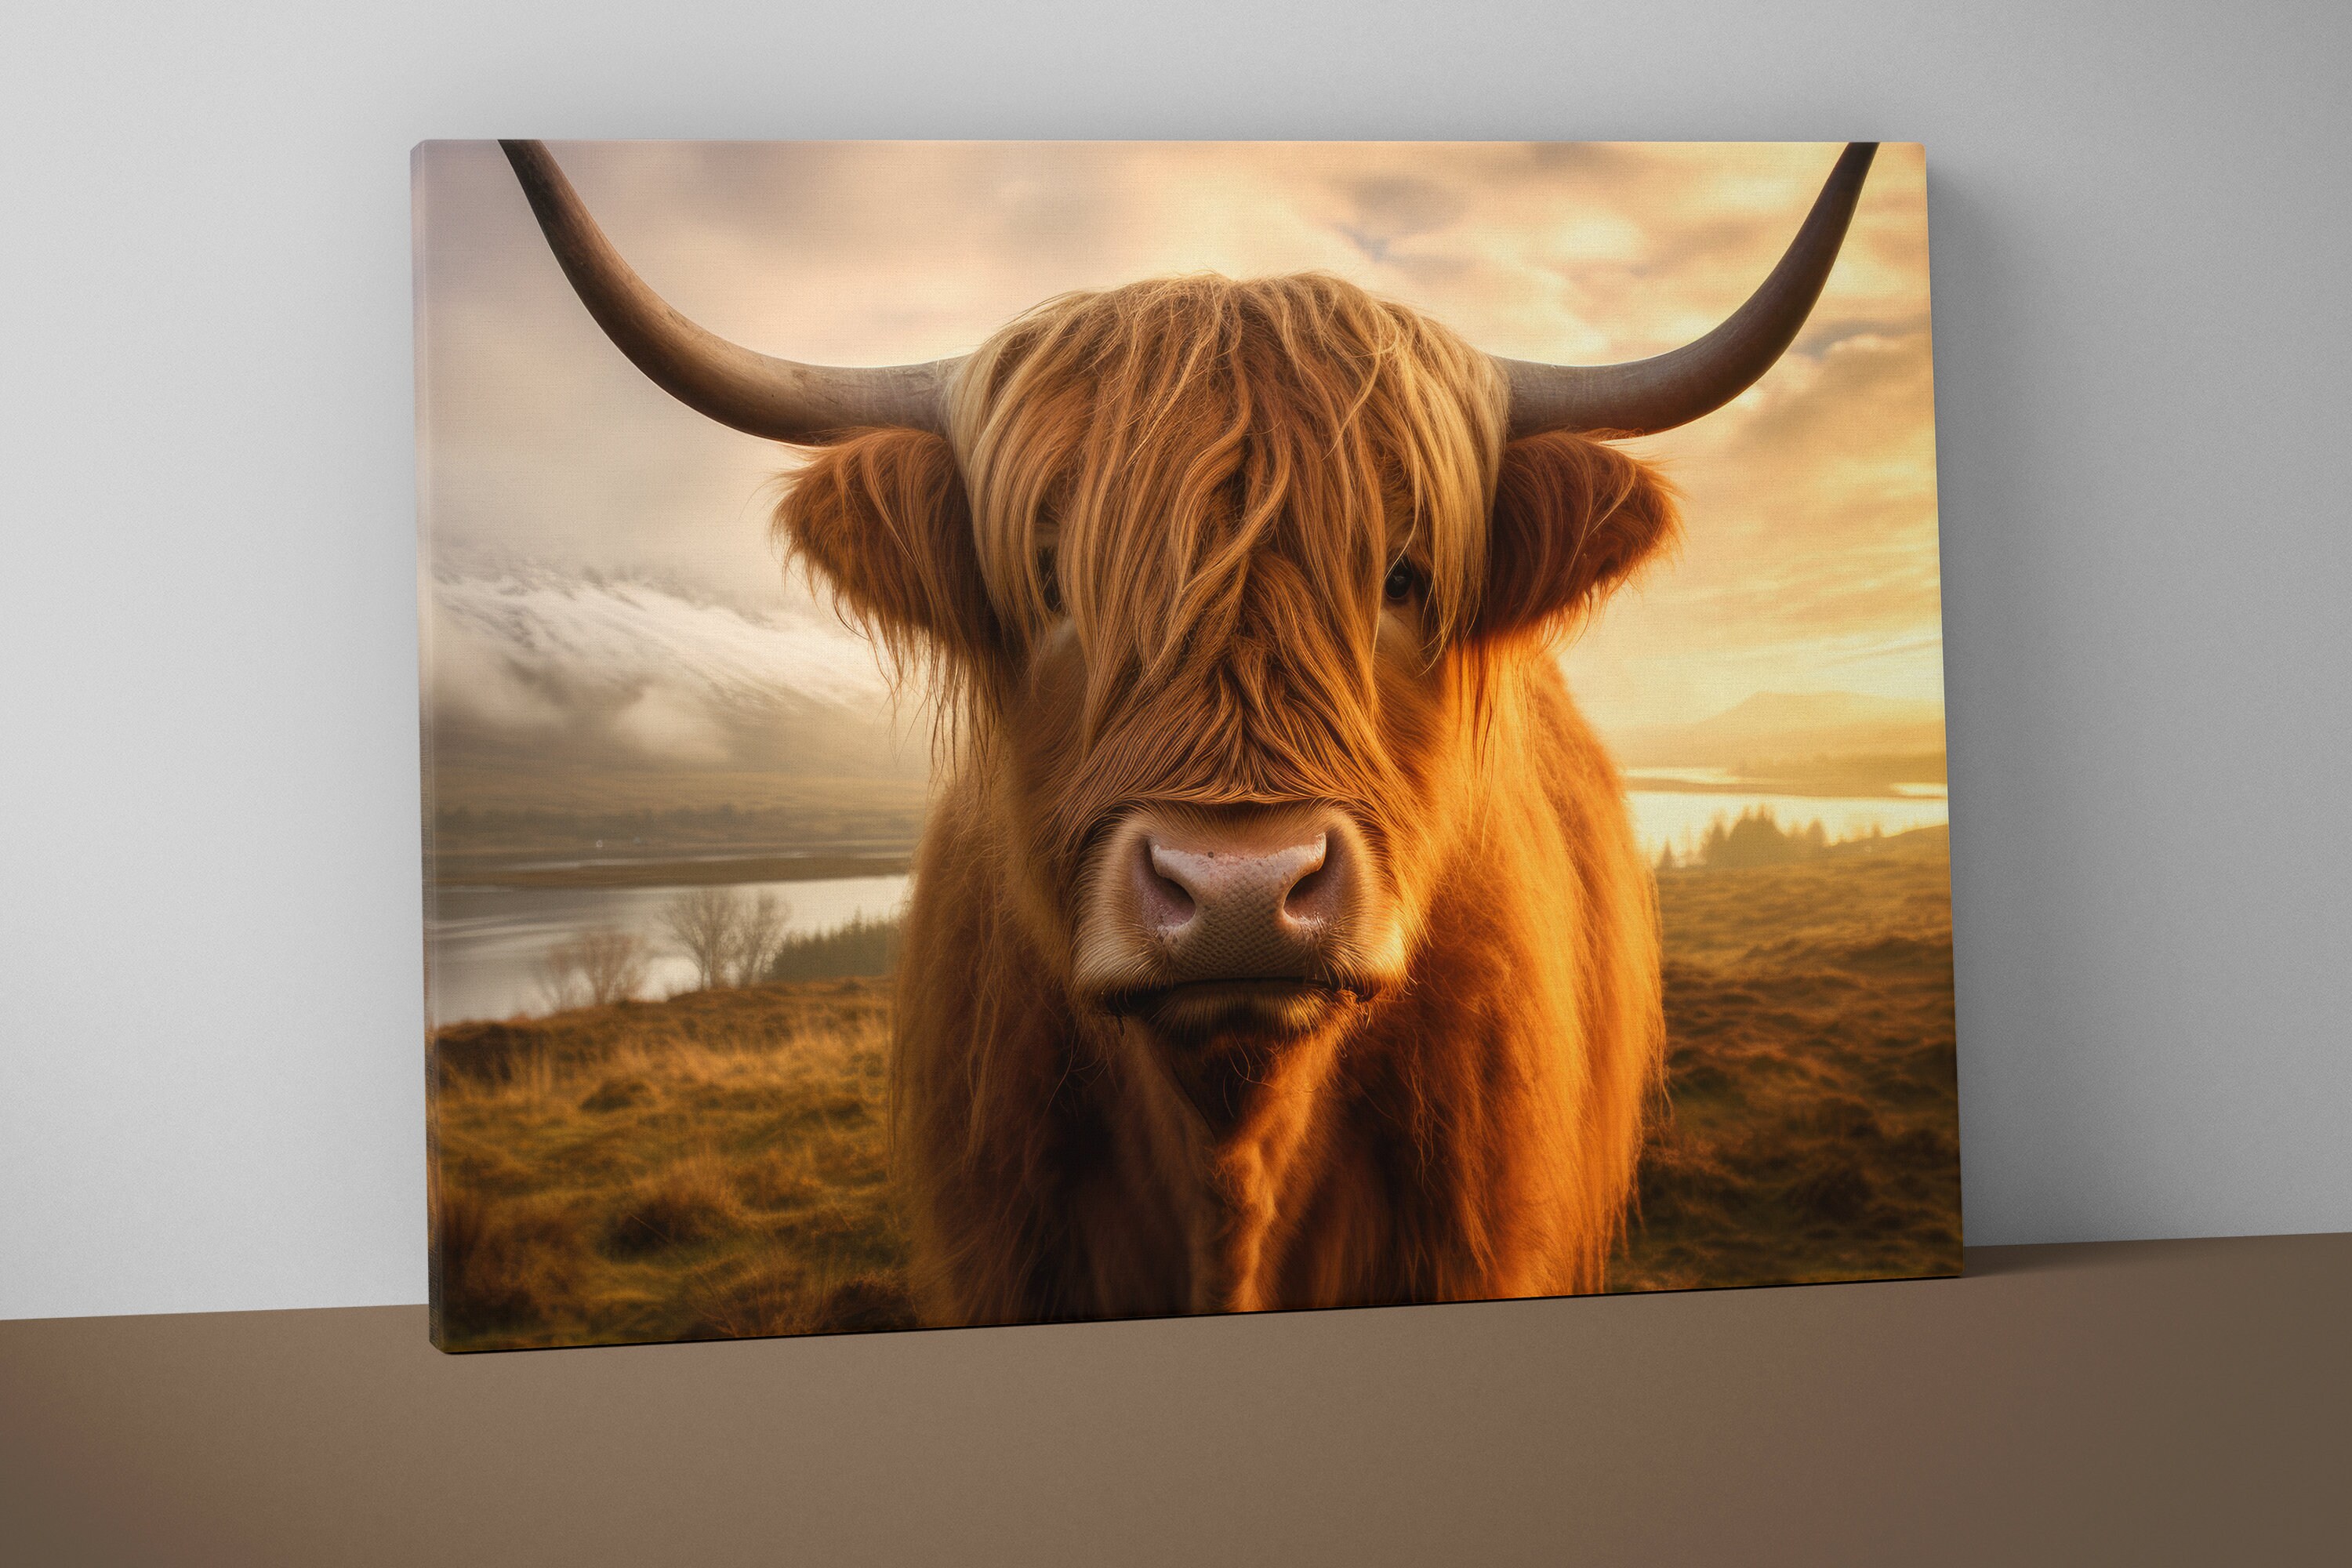 Highland Cow Poster Etsy